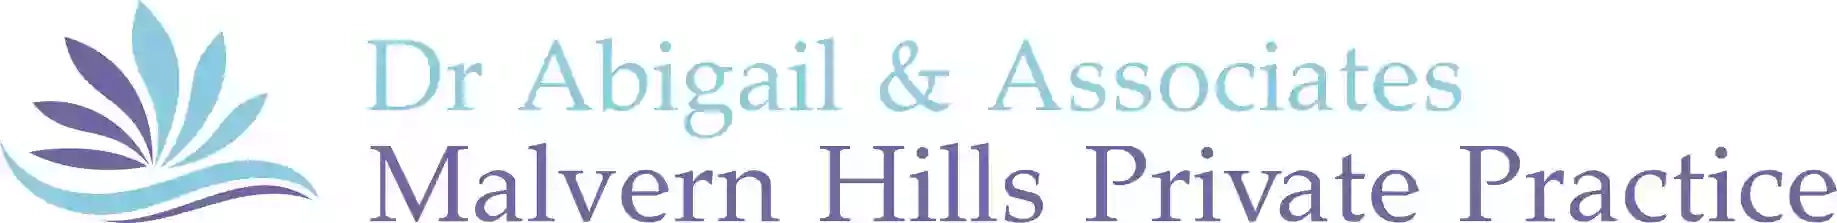 Malvern Hills Private Practice - Psychology & Counselling, Adults, Couples & Children, Malvern